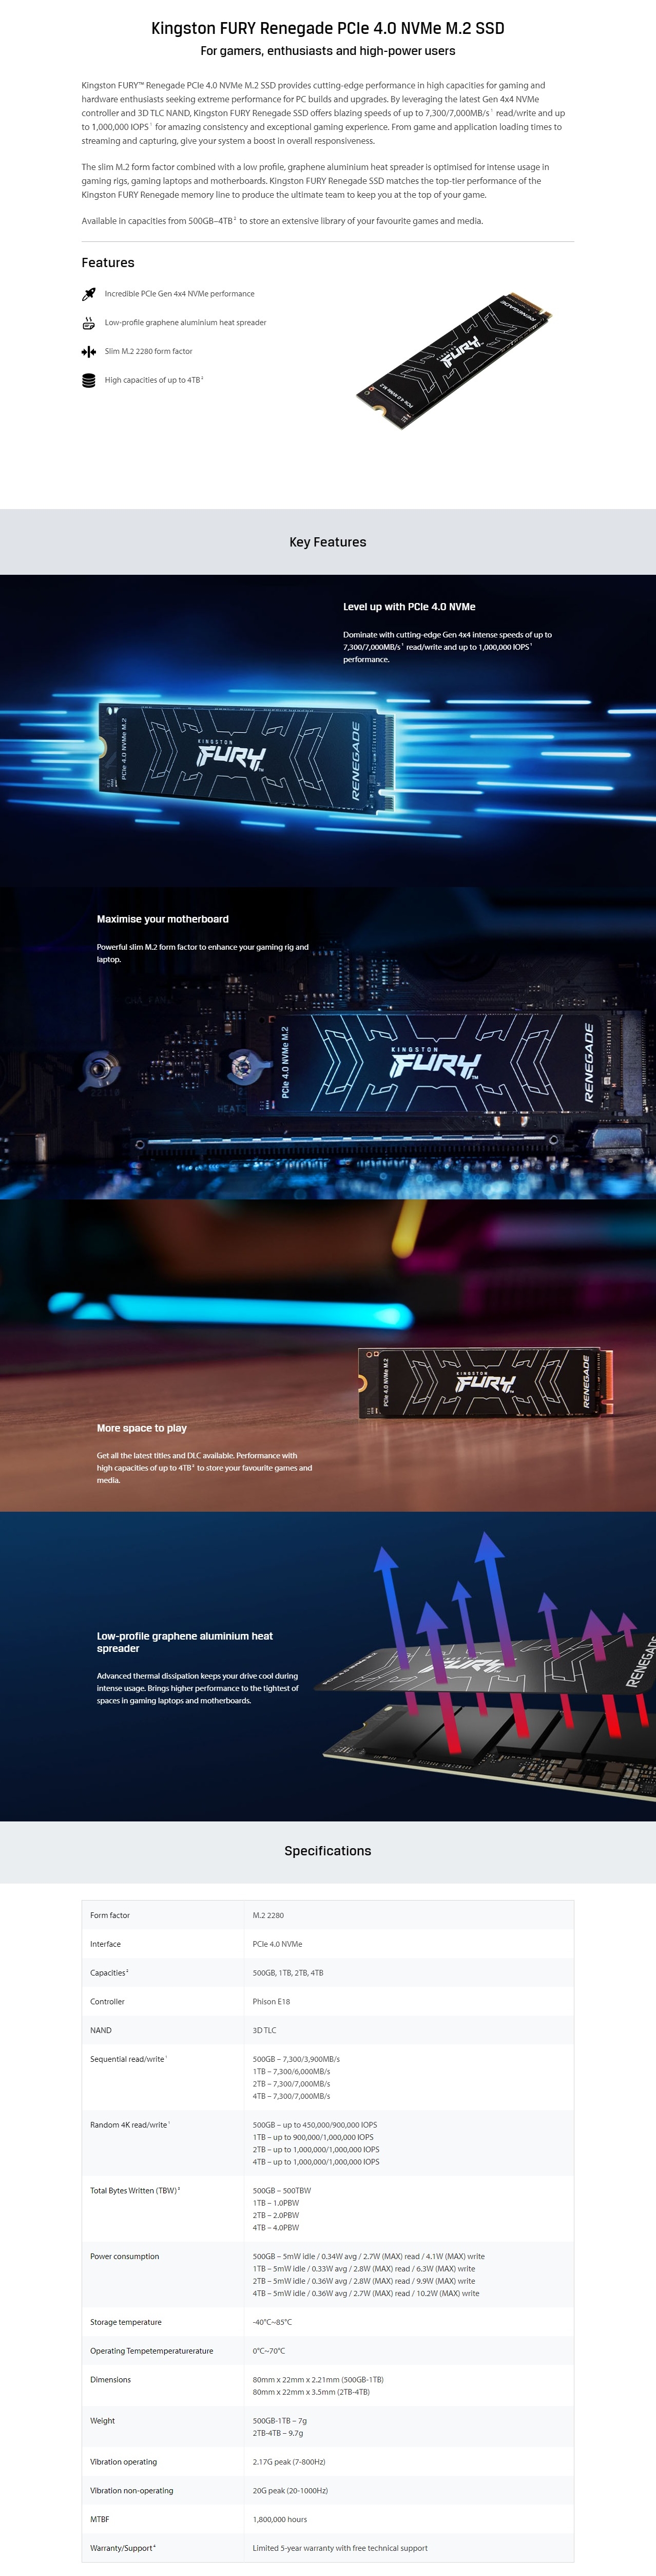 A large marketing image providing additional information about the product Kingston FURY Renegade PCIe Gen4 NVMe M.2 SSD - 1TB - Additional alt info not provided